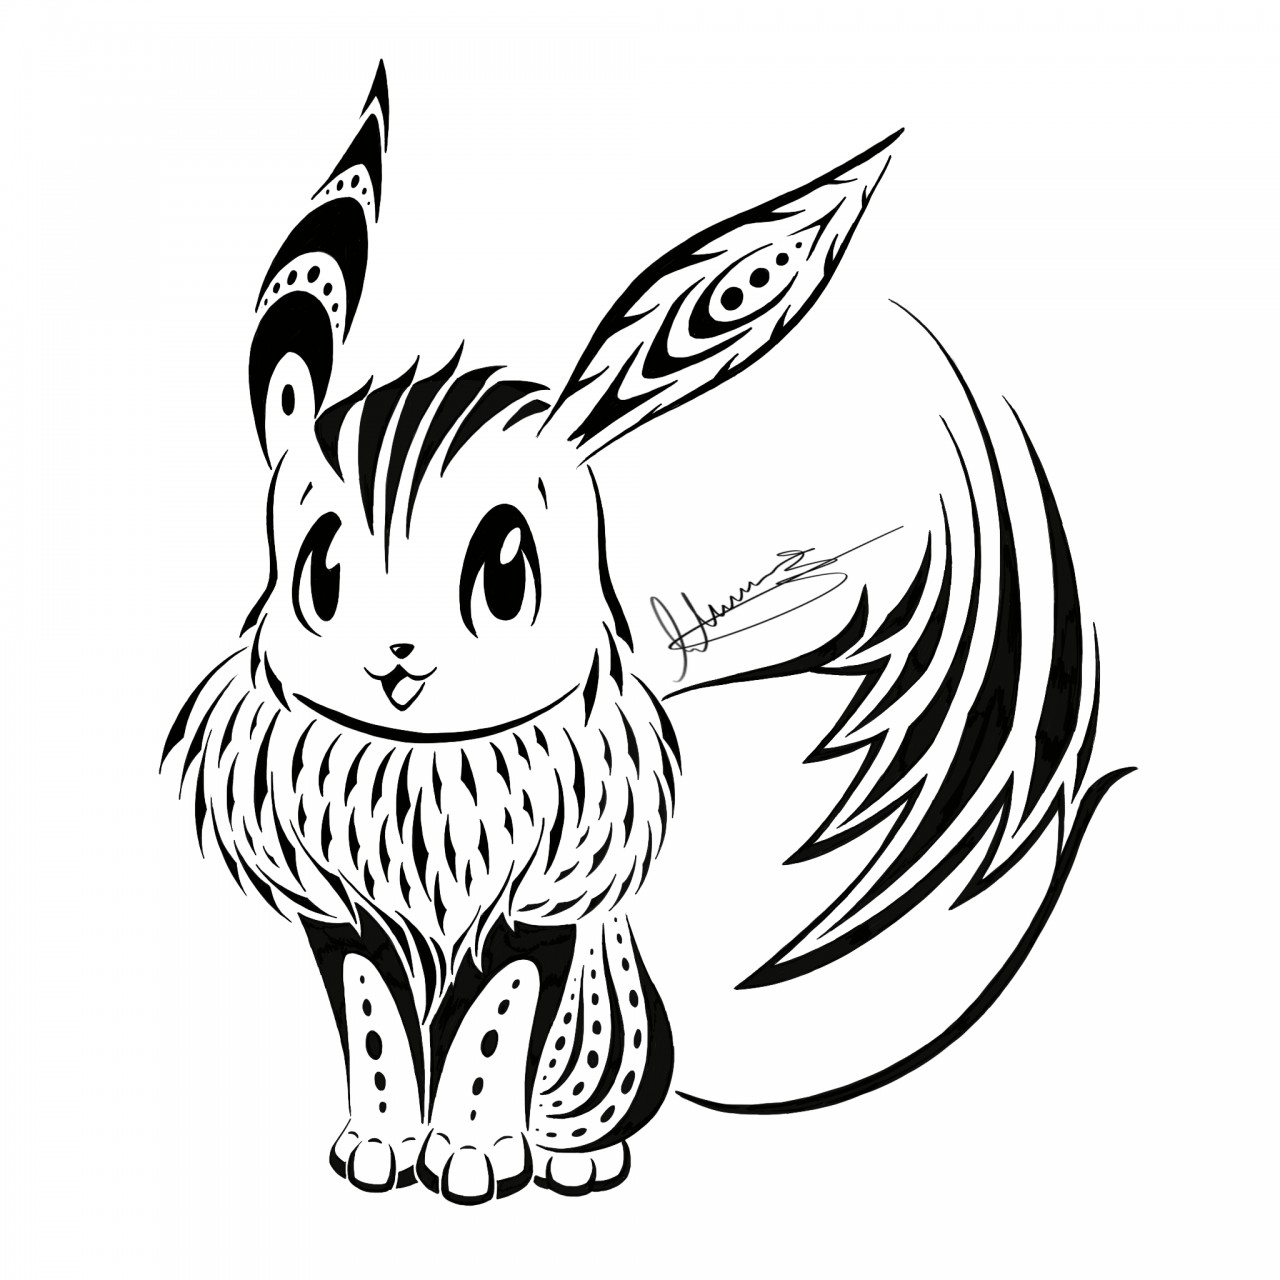 Mega Lucario Pokemon Coloring Pages Tattoo Style - Get Coloring Pages